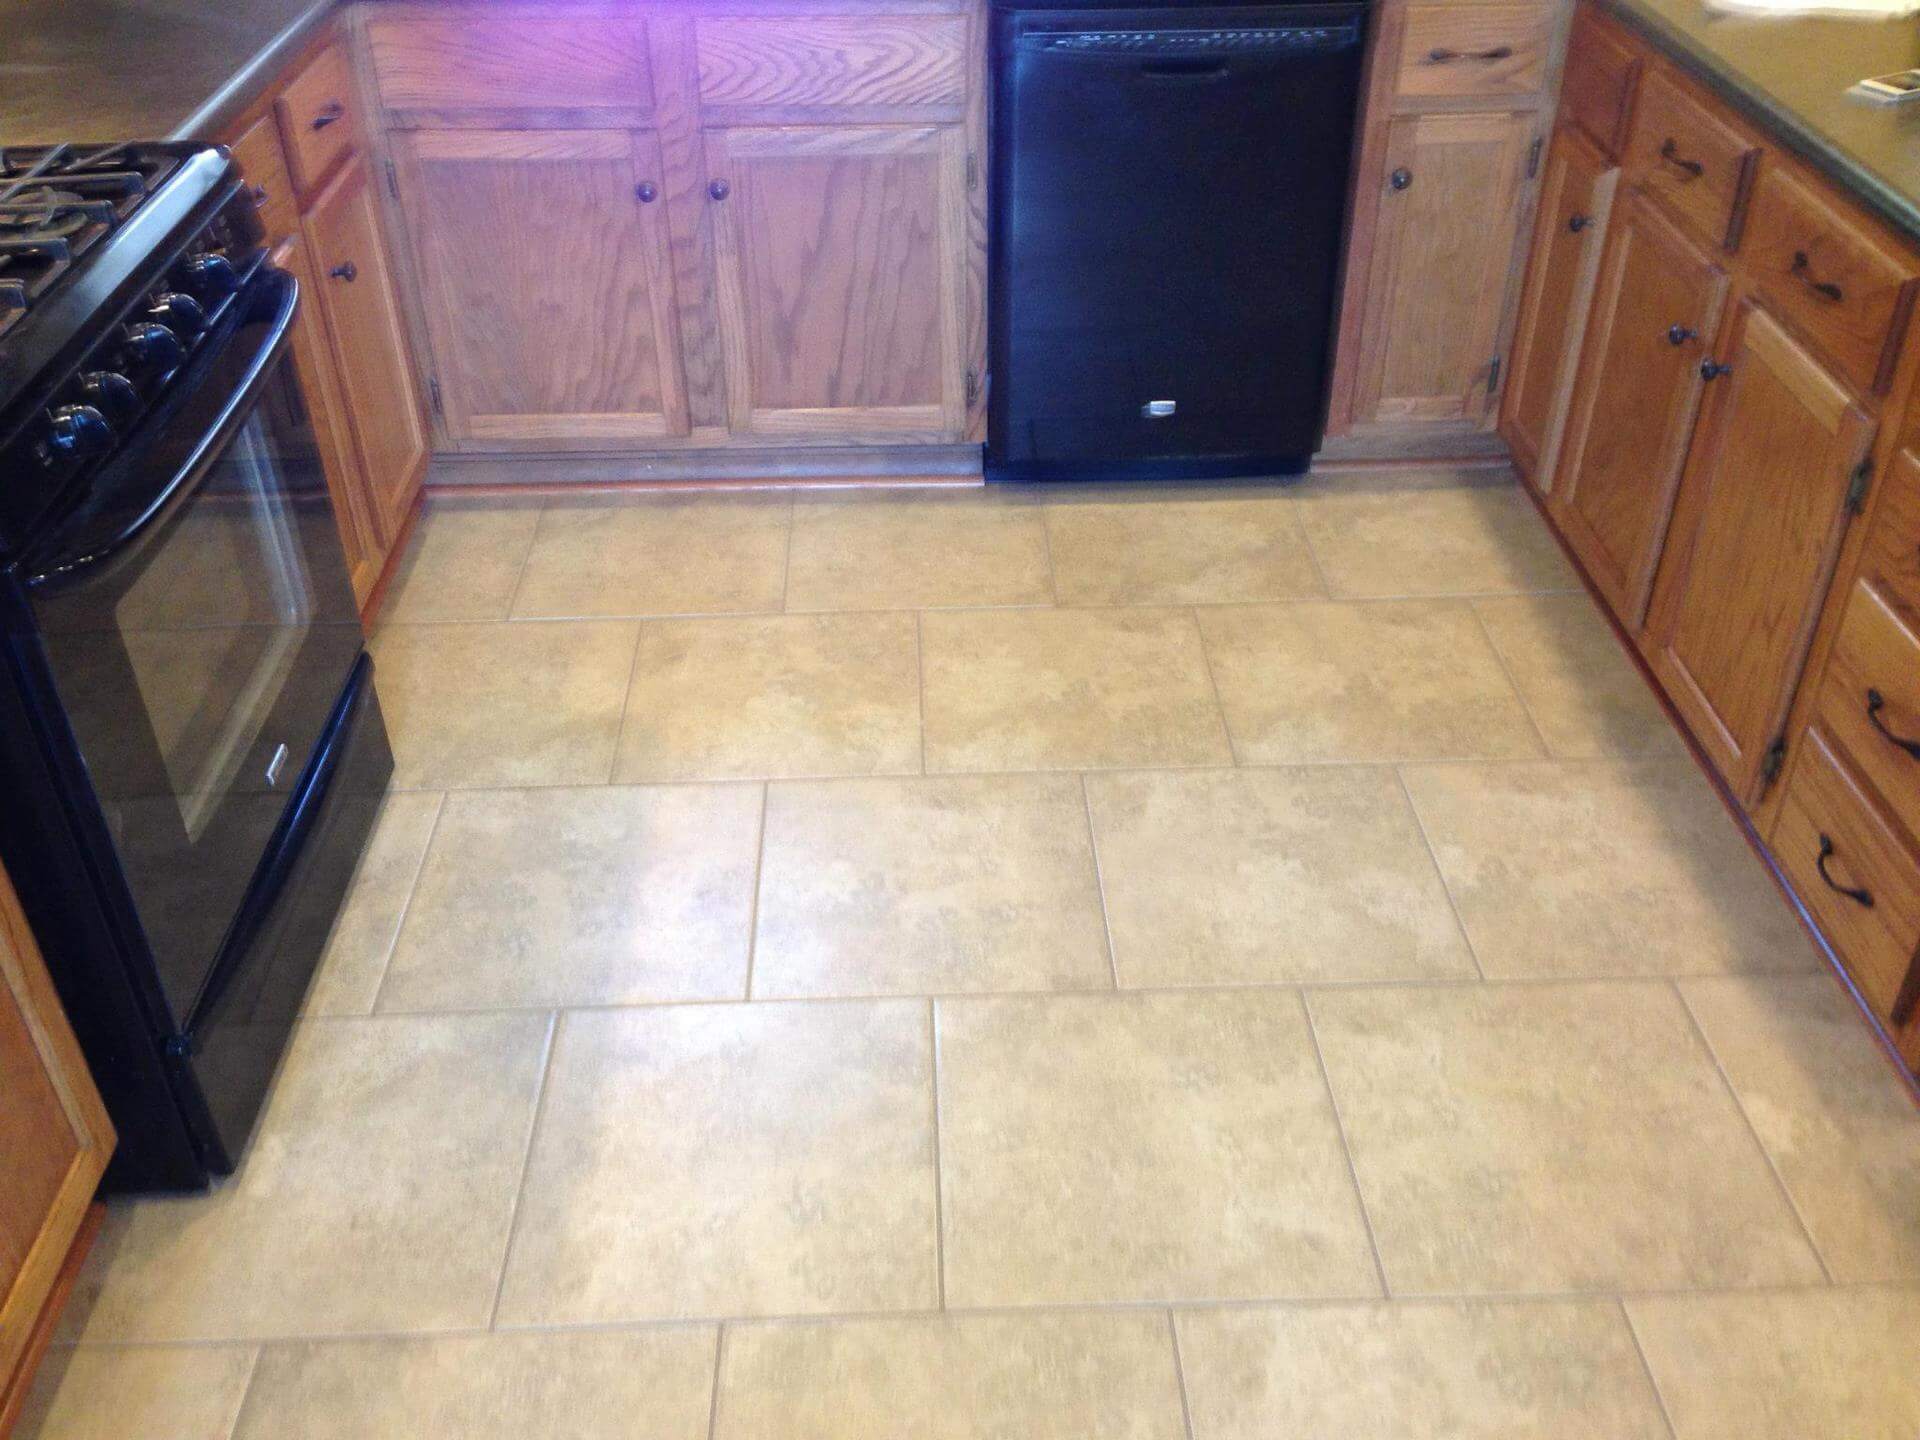 Tile flooring in a small kitchetn